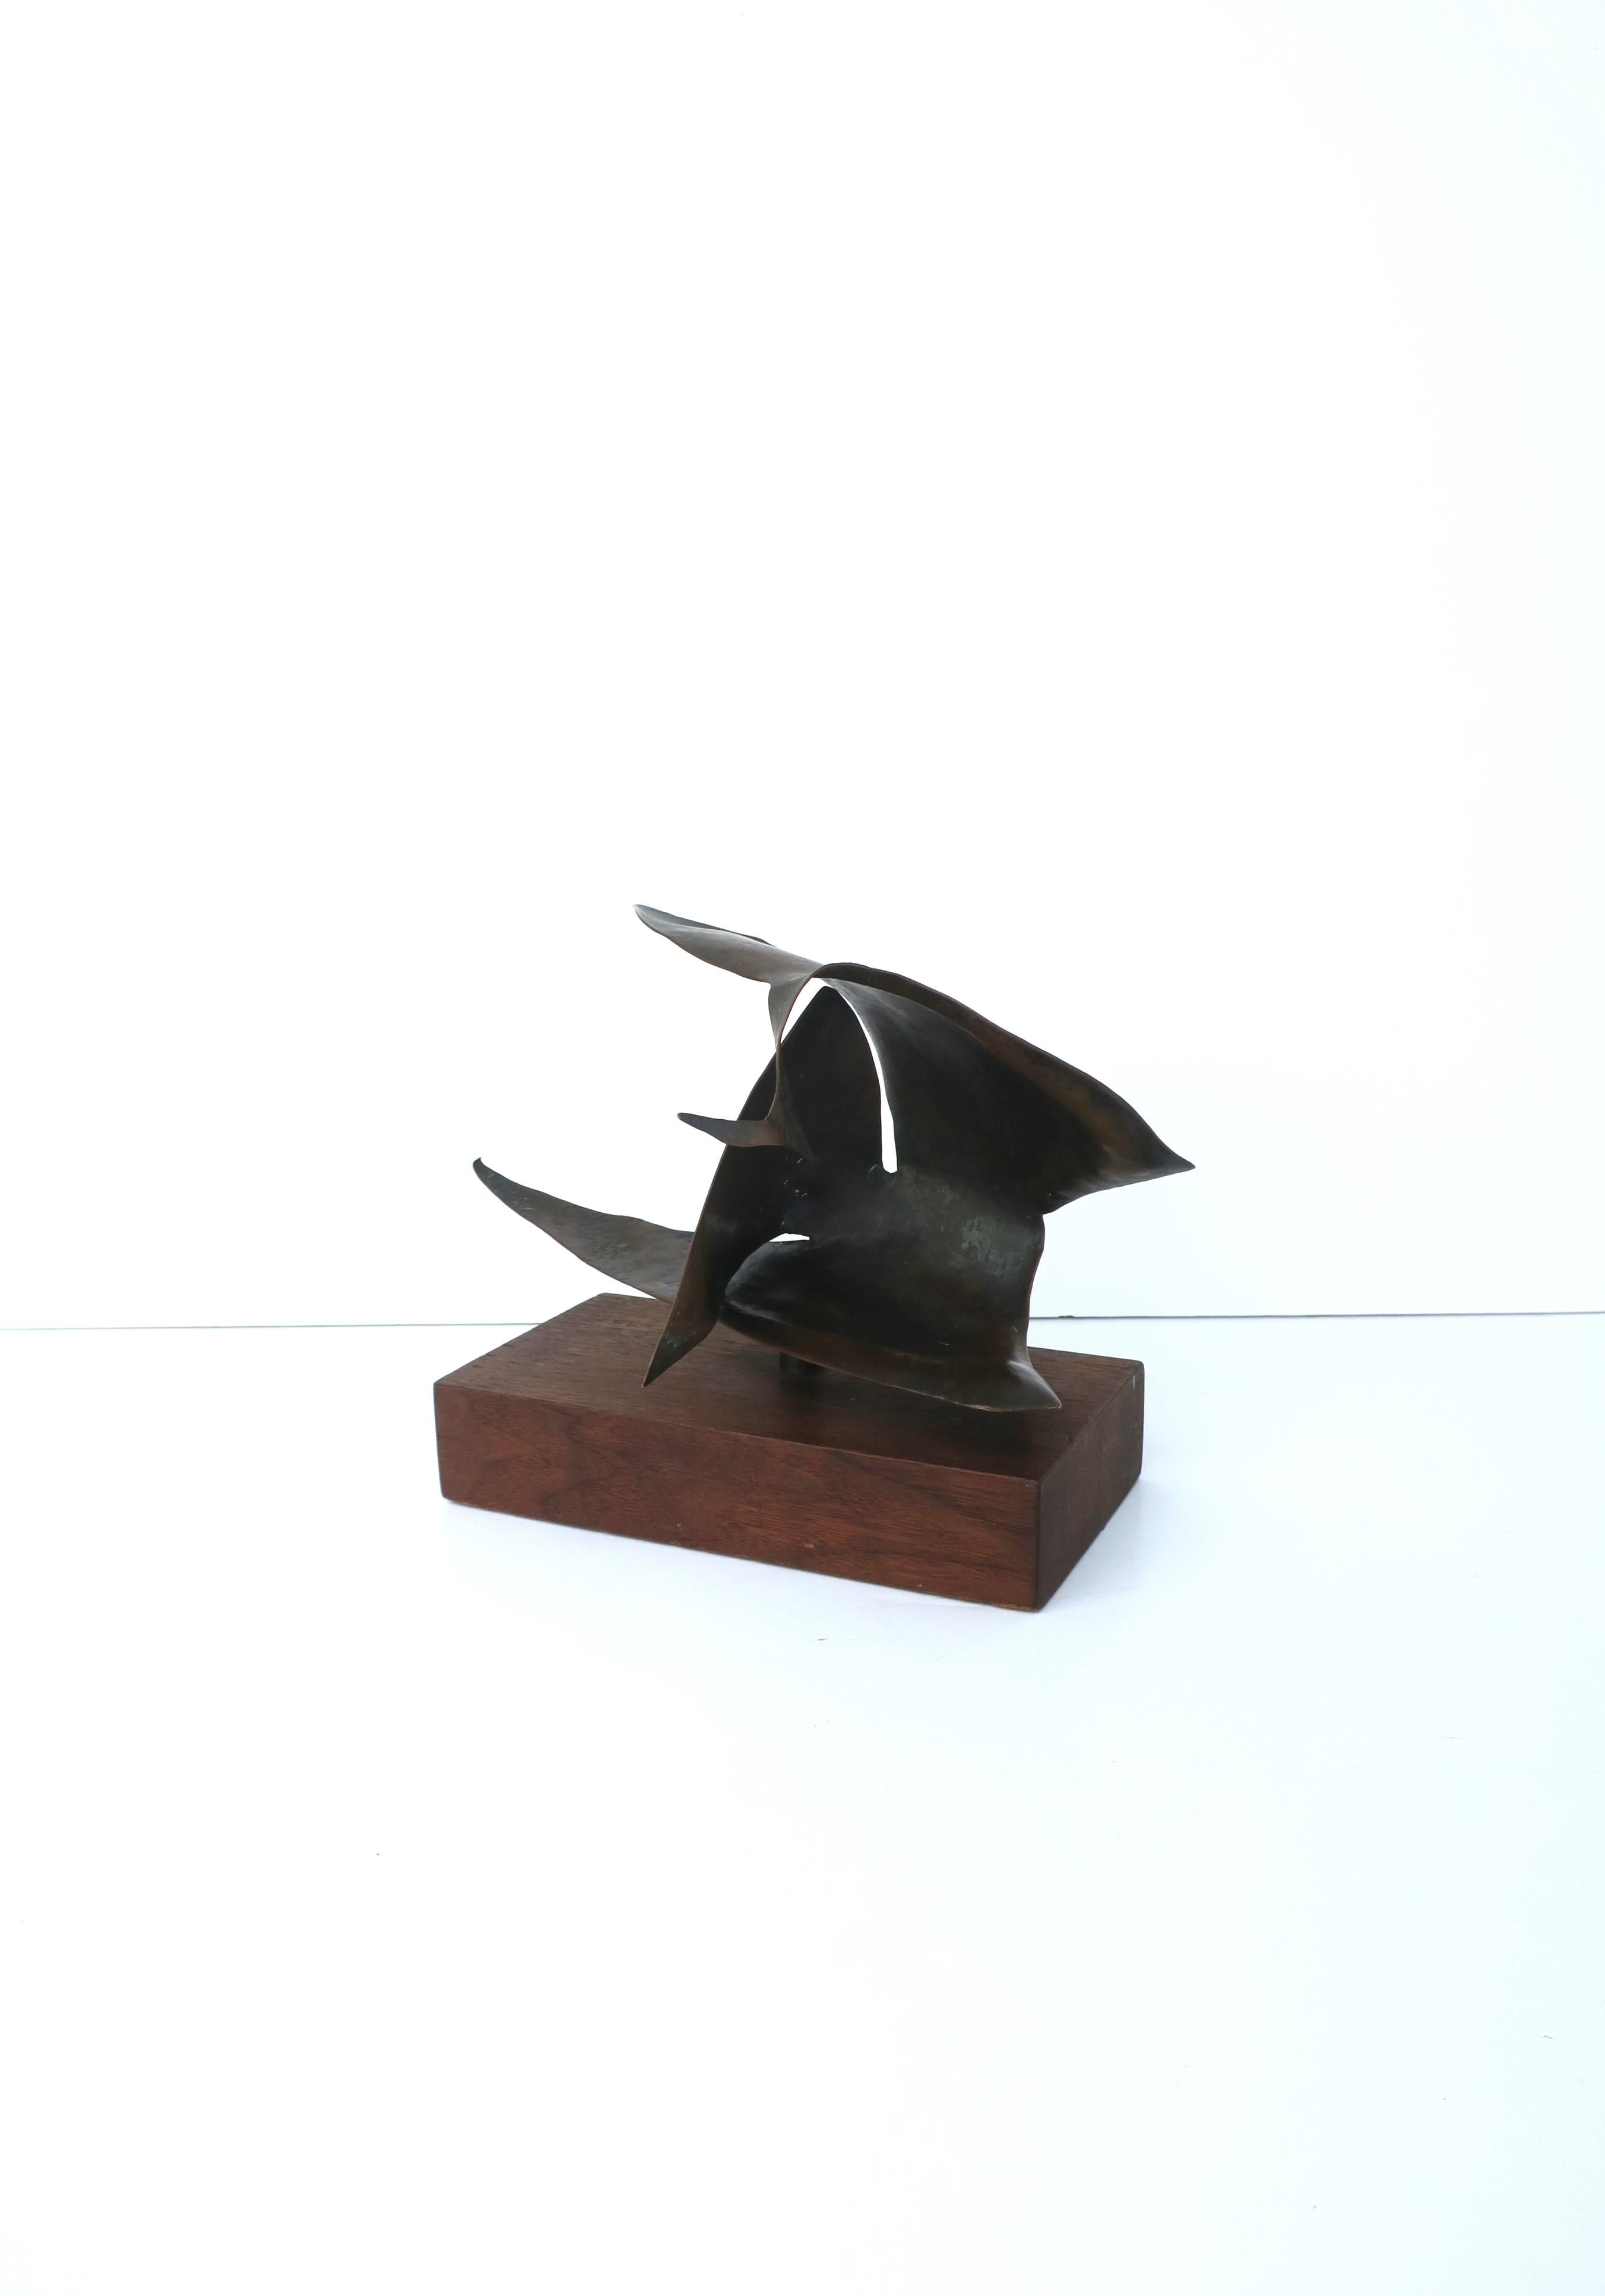 20th Century Abstract Bronzed Copper Sculpture, circa 1960s For Sale